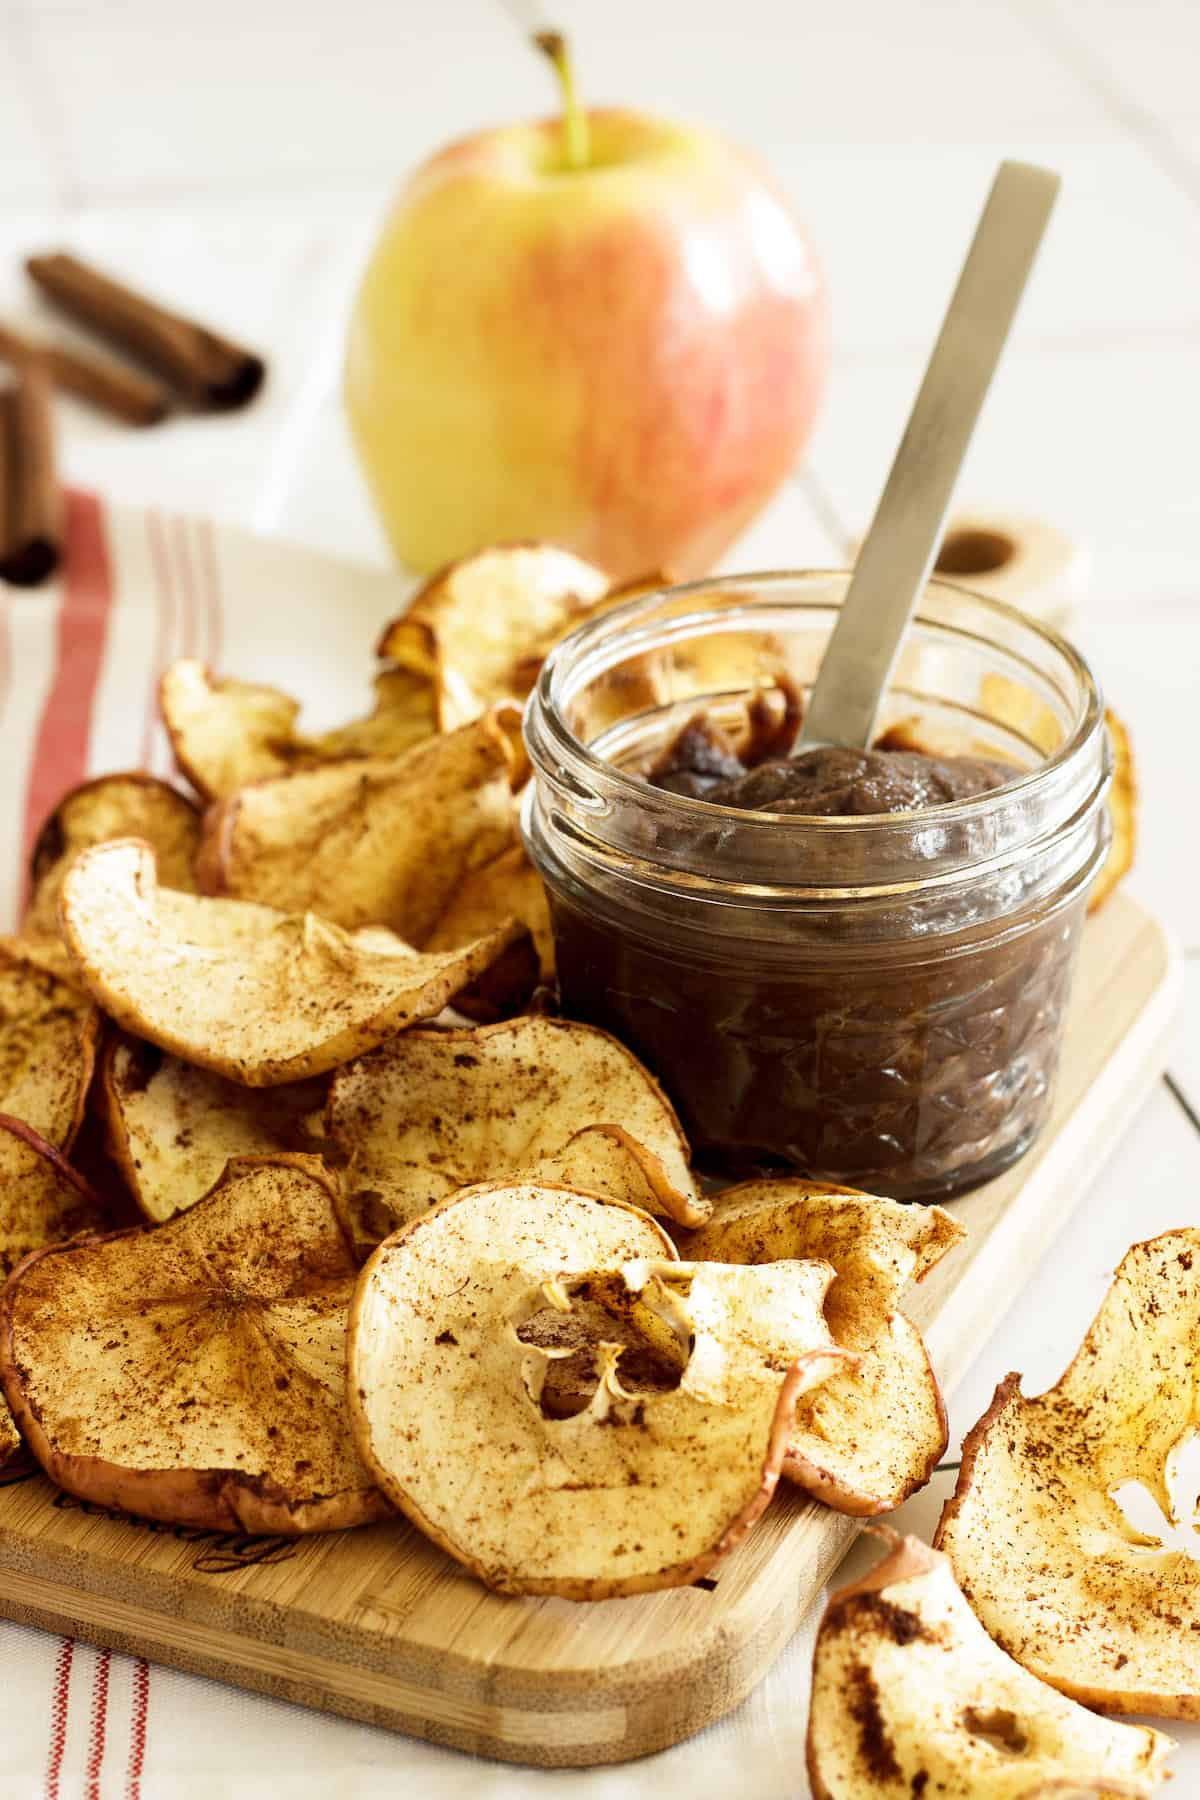 A pile of air fryer apple chips on a board with a small jar of chocolate sauce next to the chips.  An apple and cinnamon sticks in the background